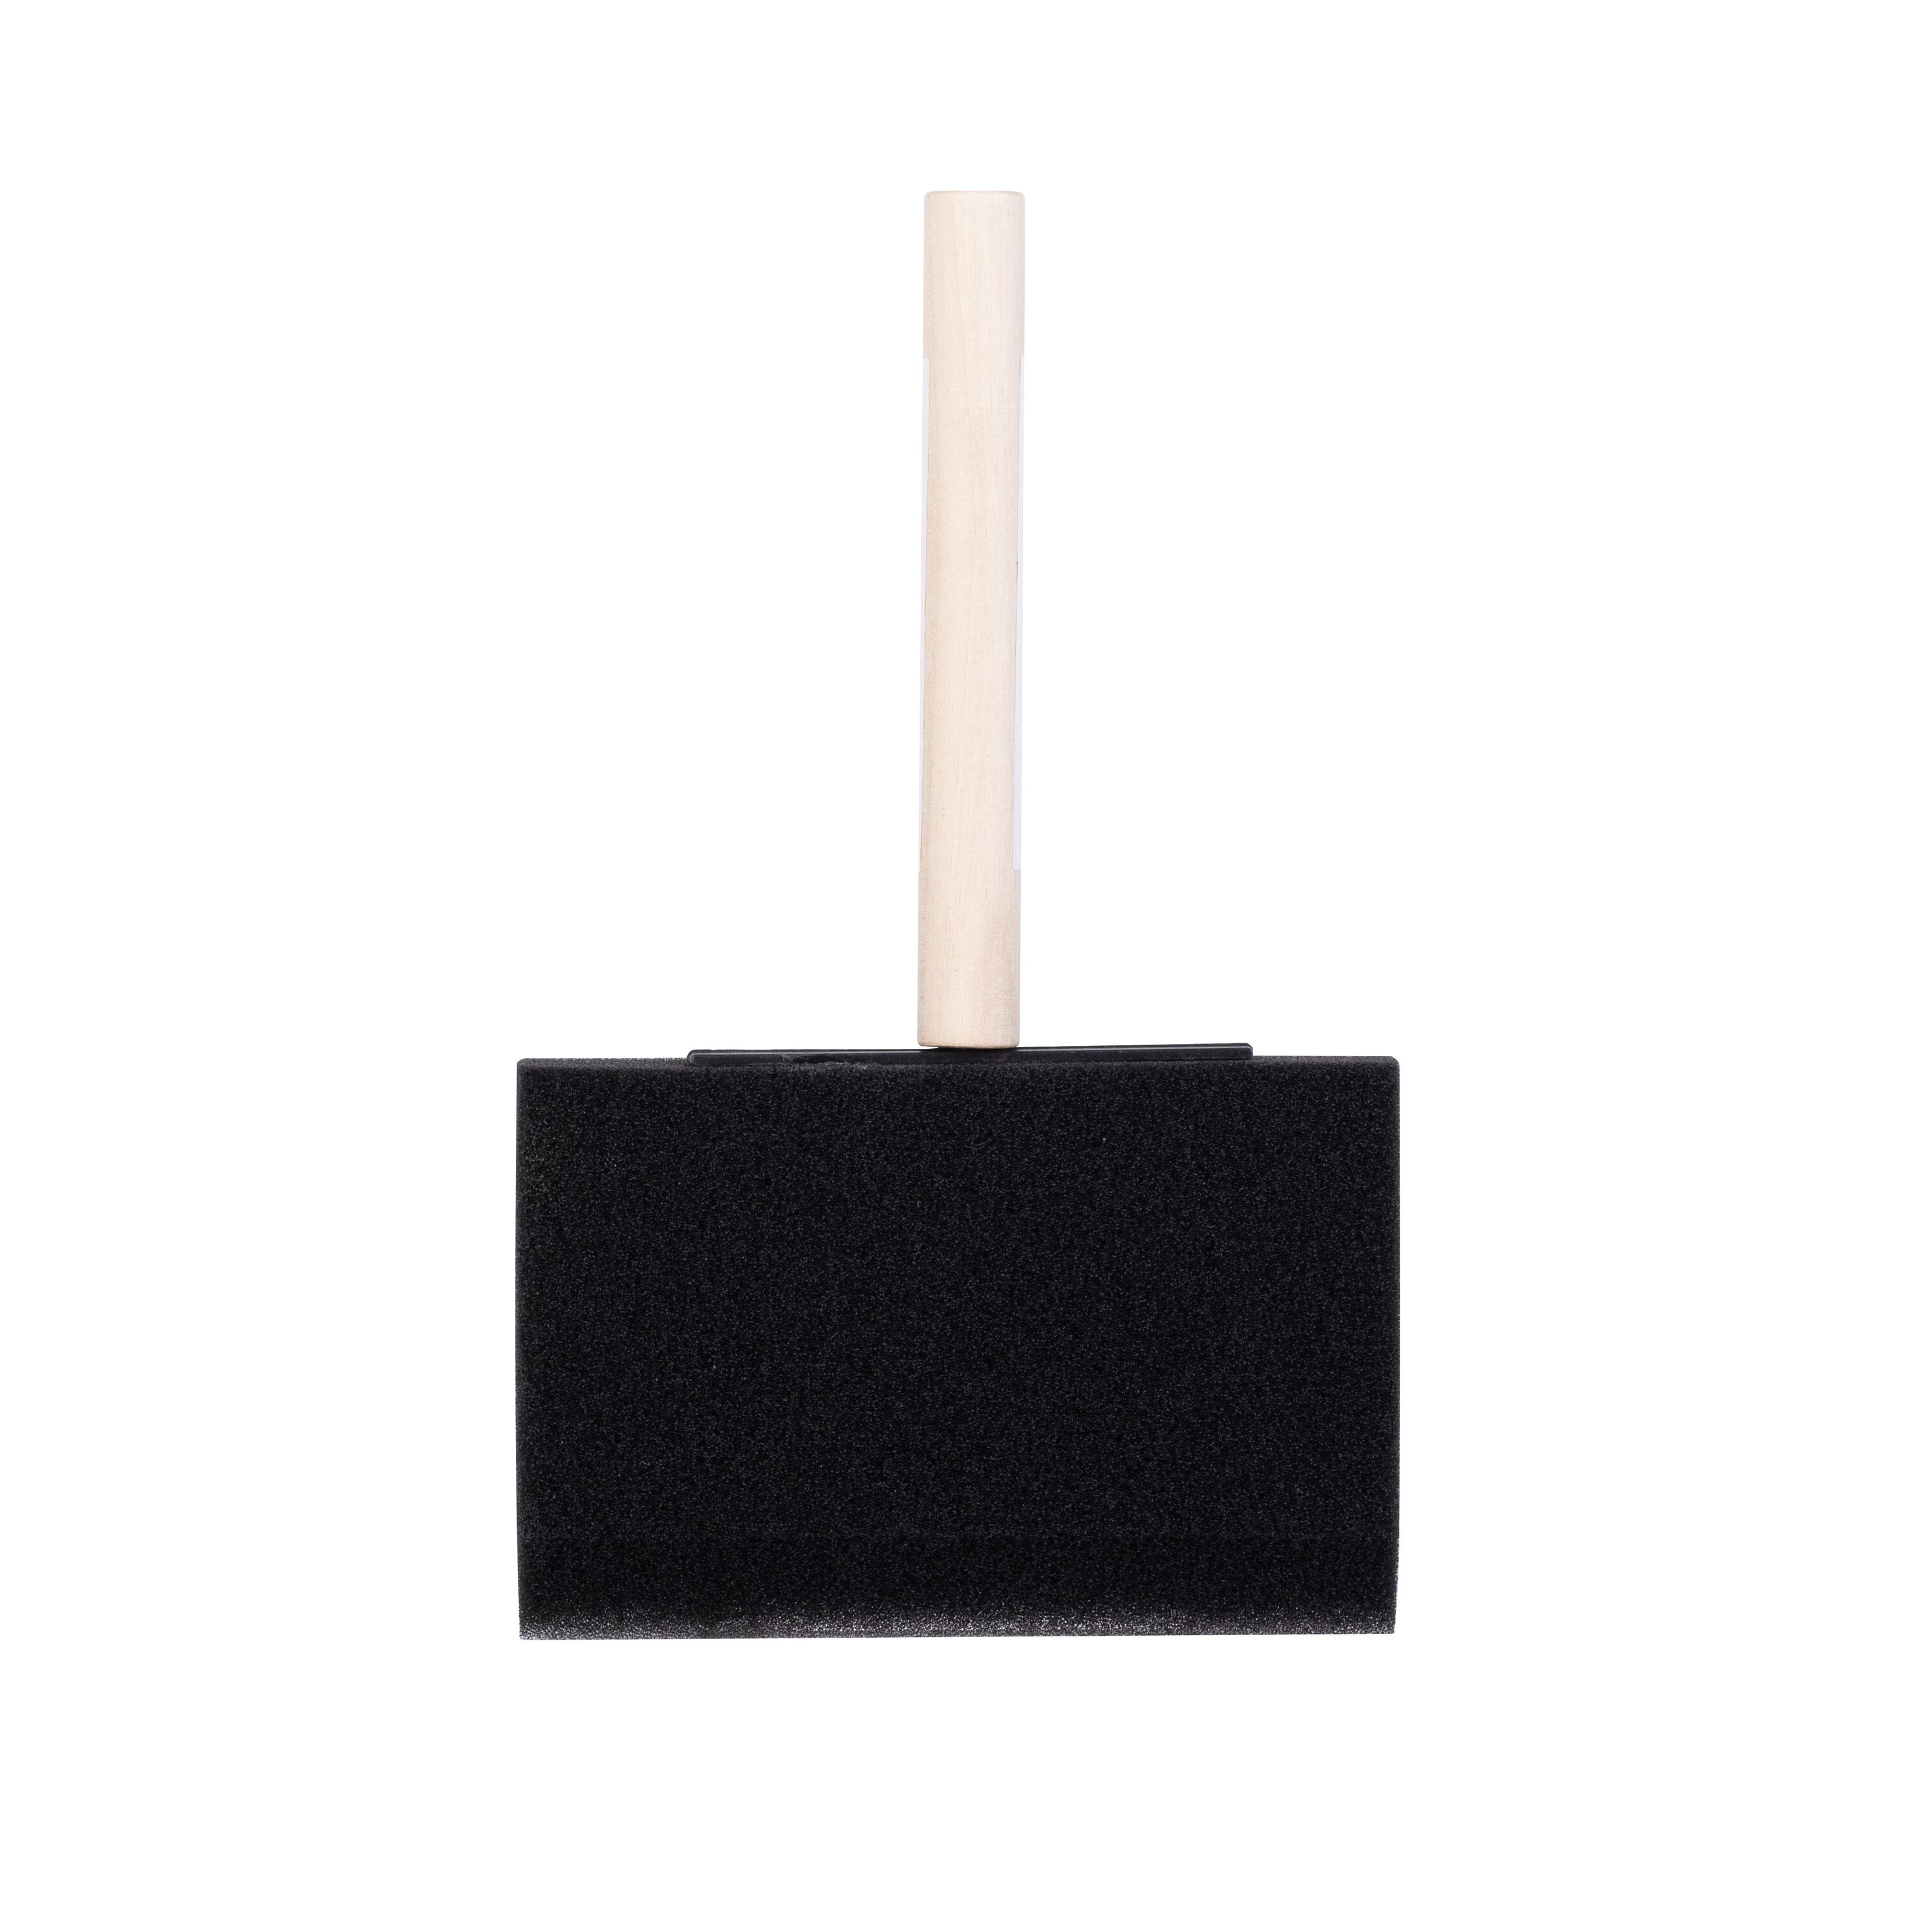 Large Paint Brush for Sheds, Fences Decking etc Wood Stain, Creosote etc  SIL212